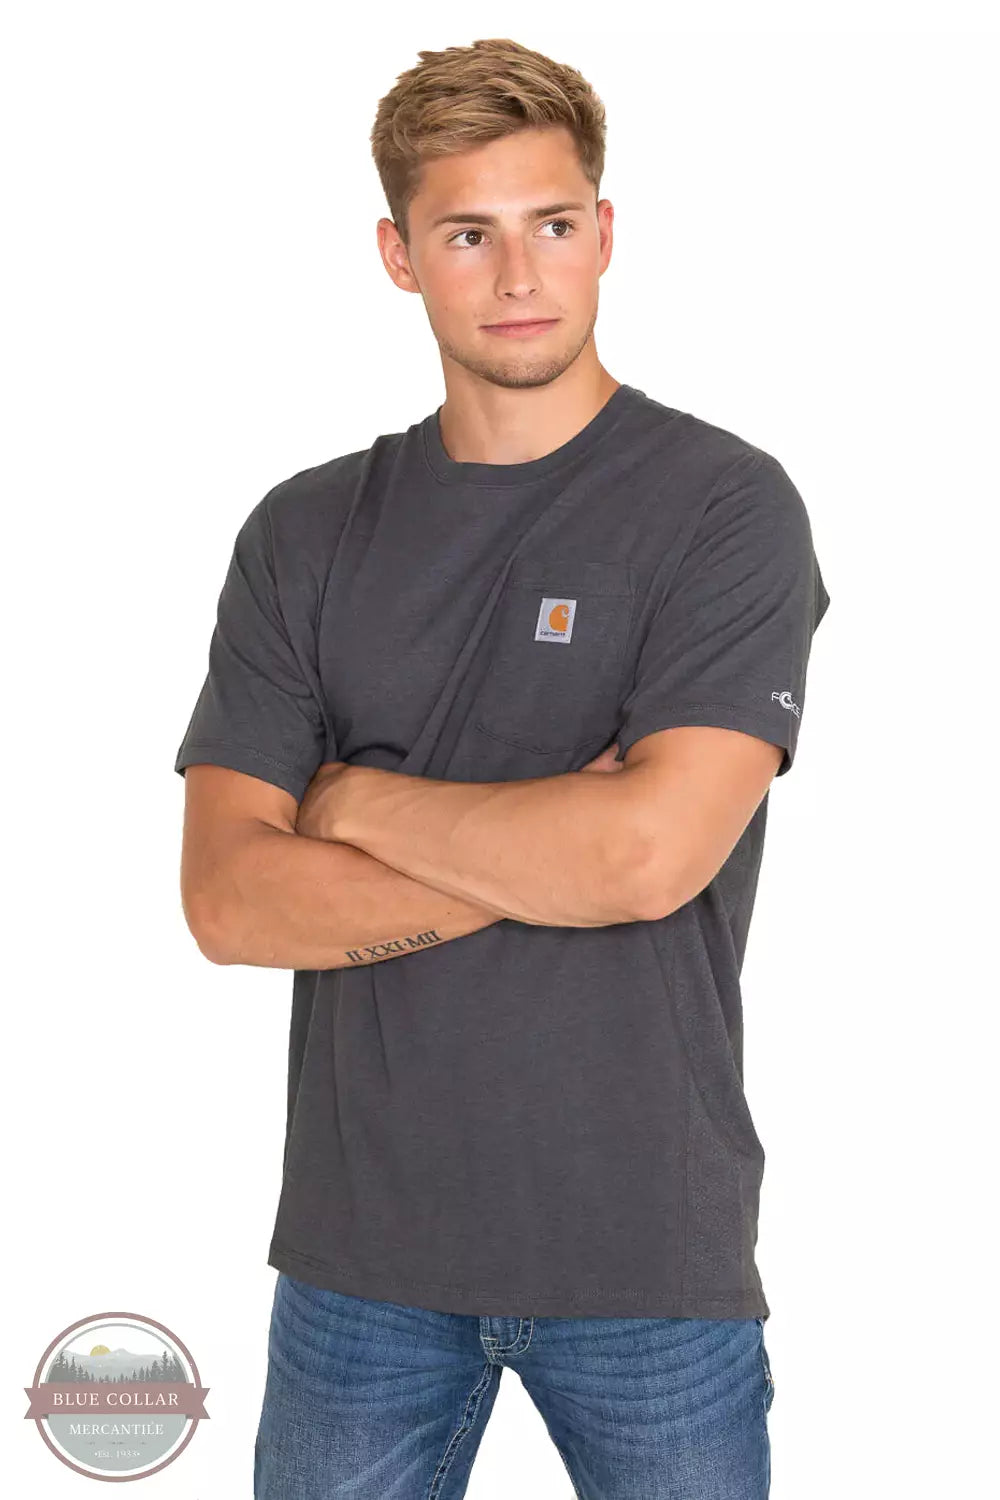 Carhartt 104616 Big & Tall Force® Relaxed Fit Midweight Short-Sleeve Pocket T-Shirt Carbon Heather Front View